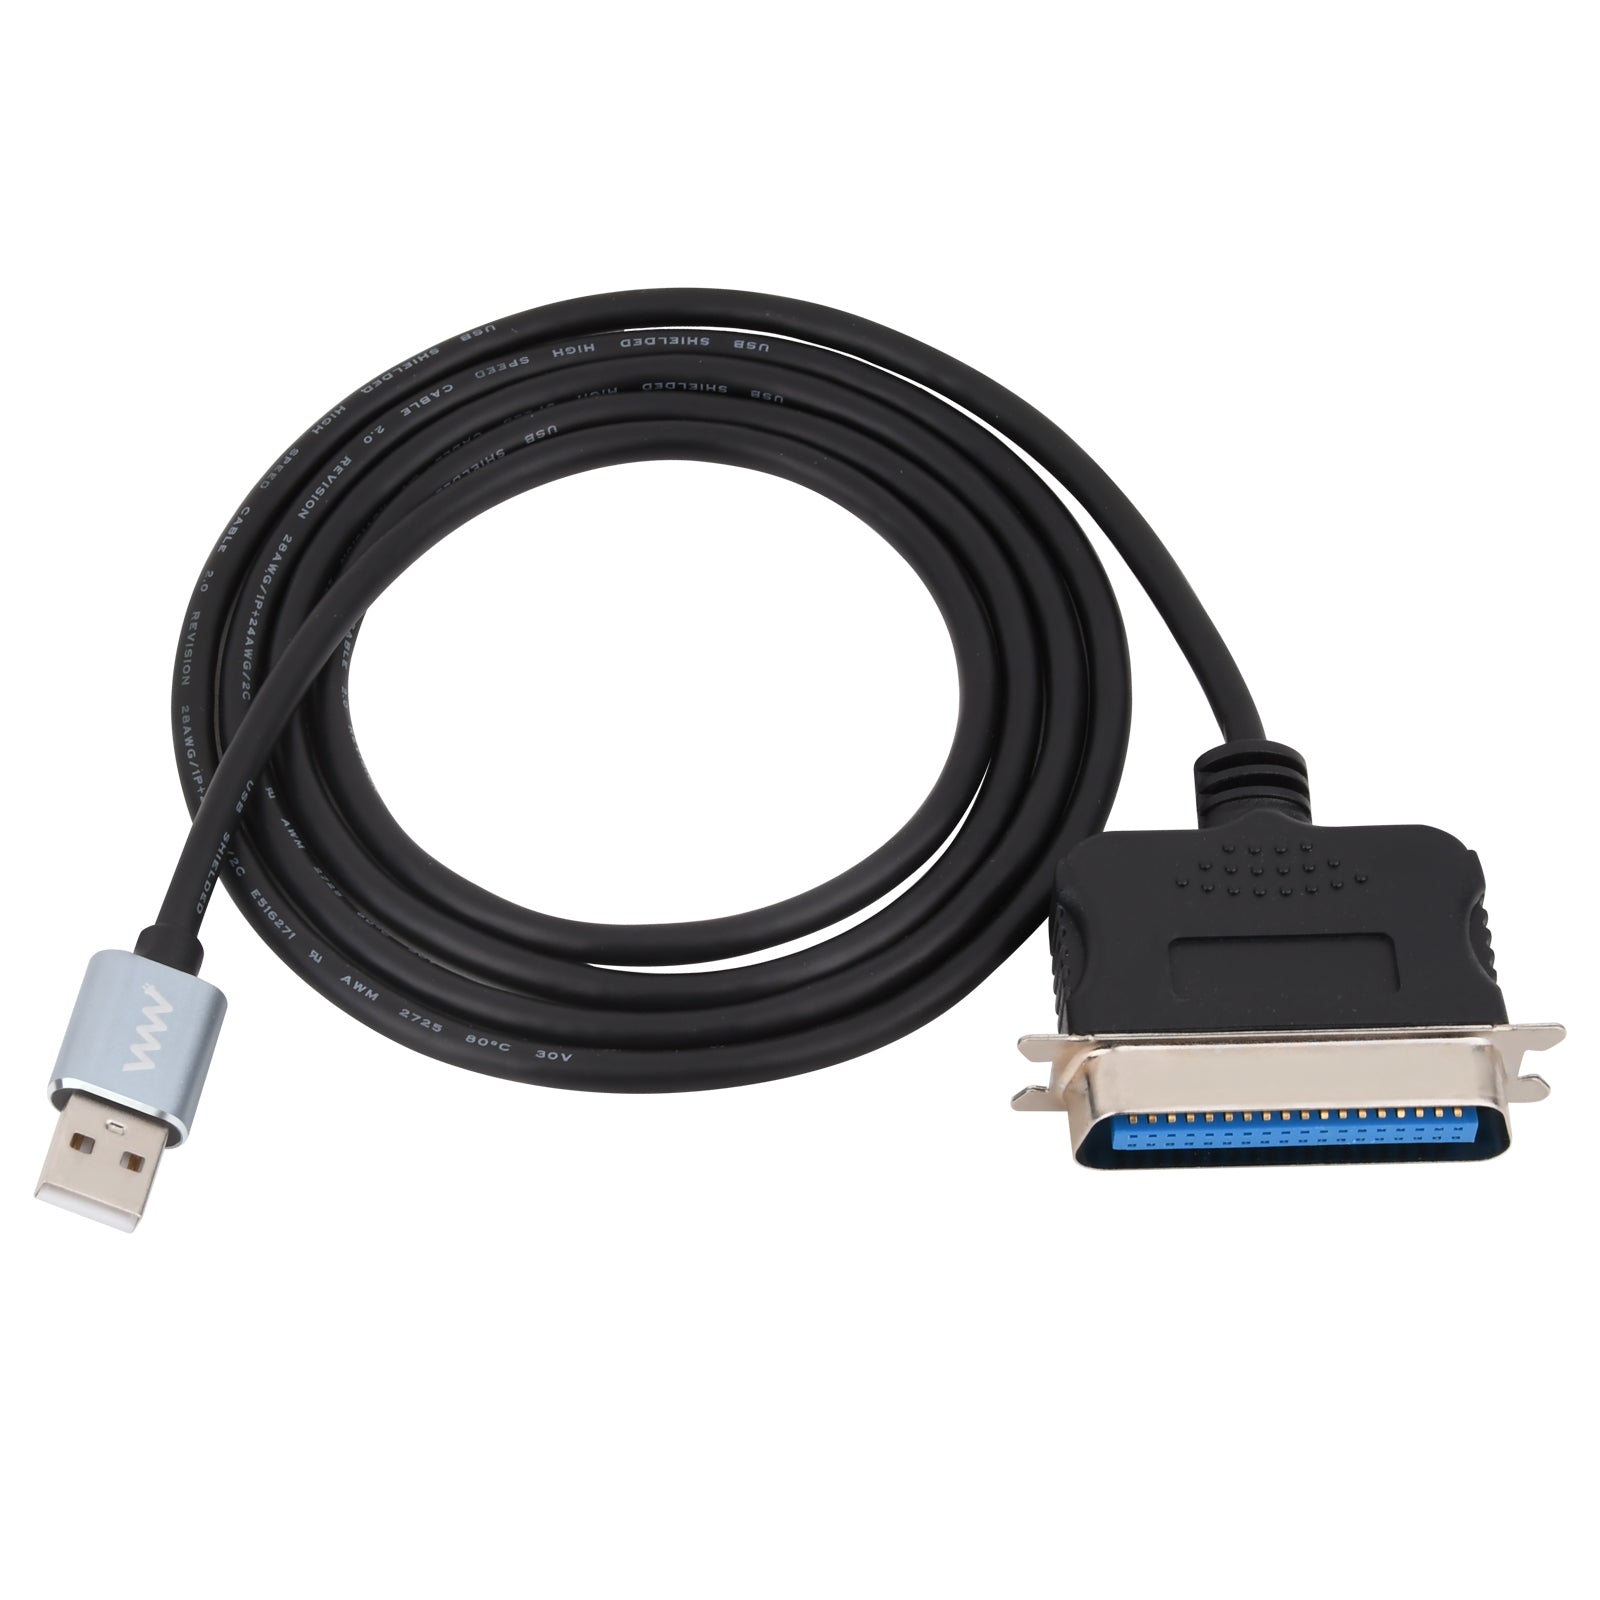 USB 2.0 A Male to Parallel IEEE 36 Pin DB36 Printer Adapter Cable 1.5m